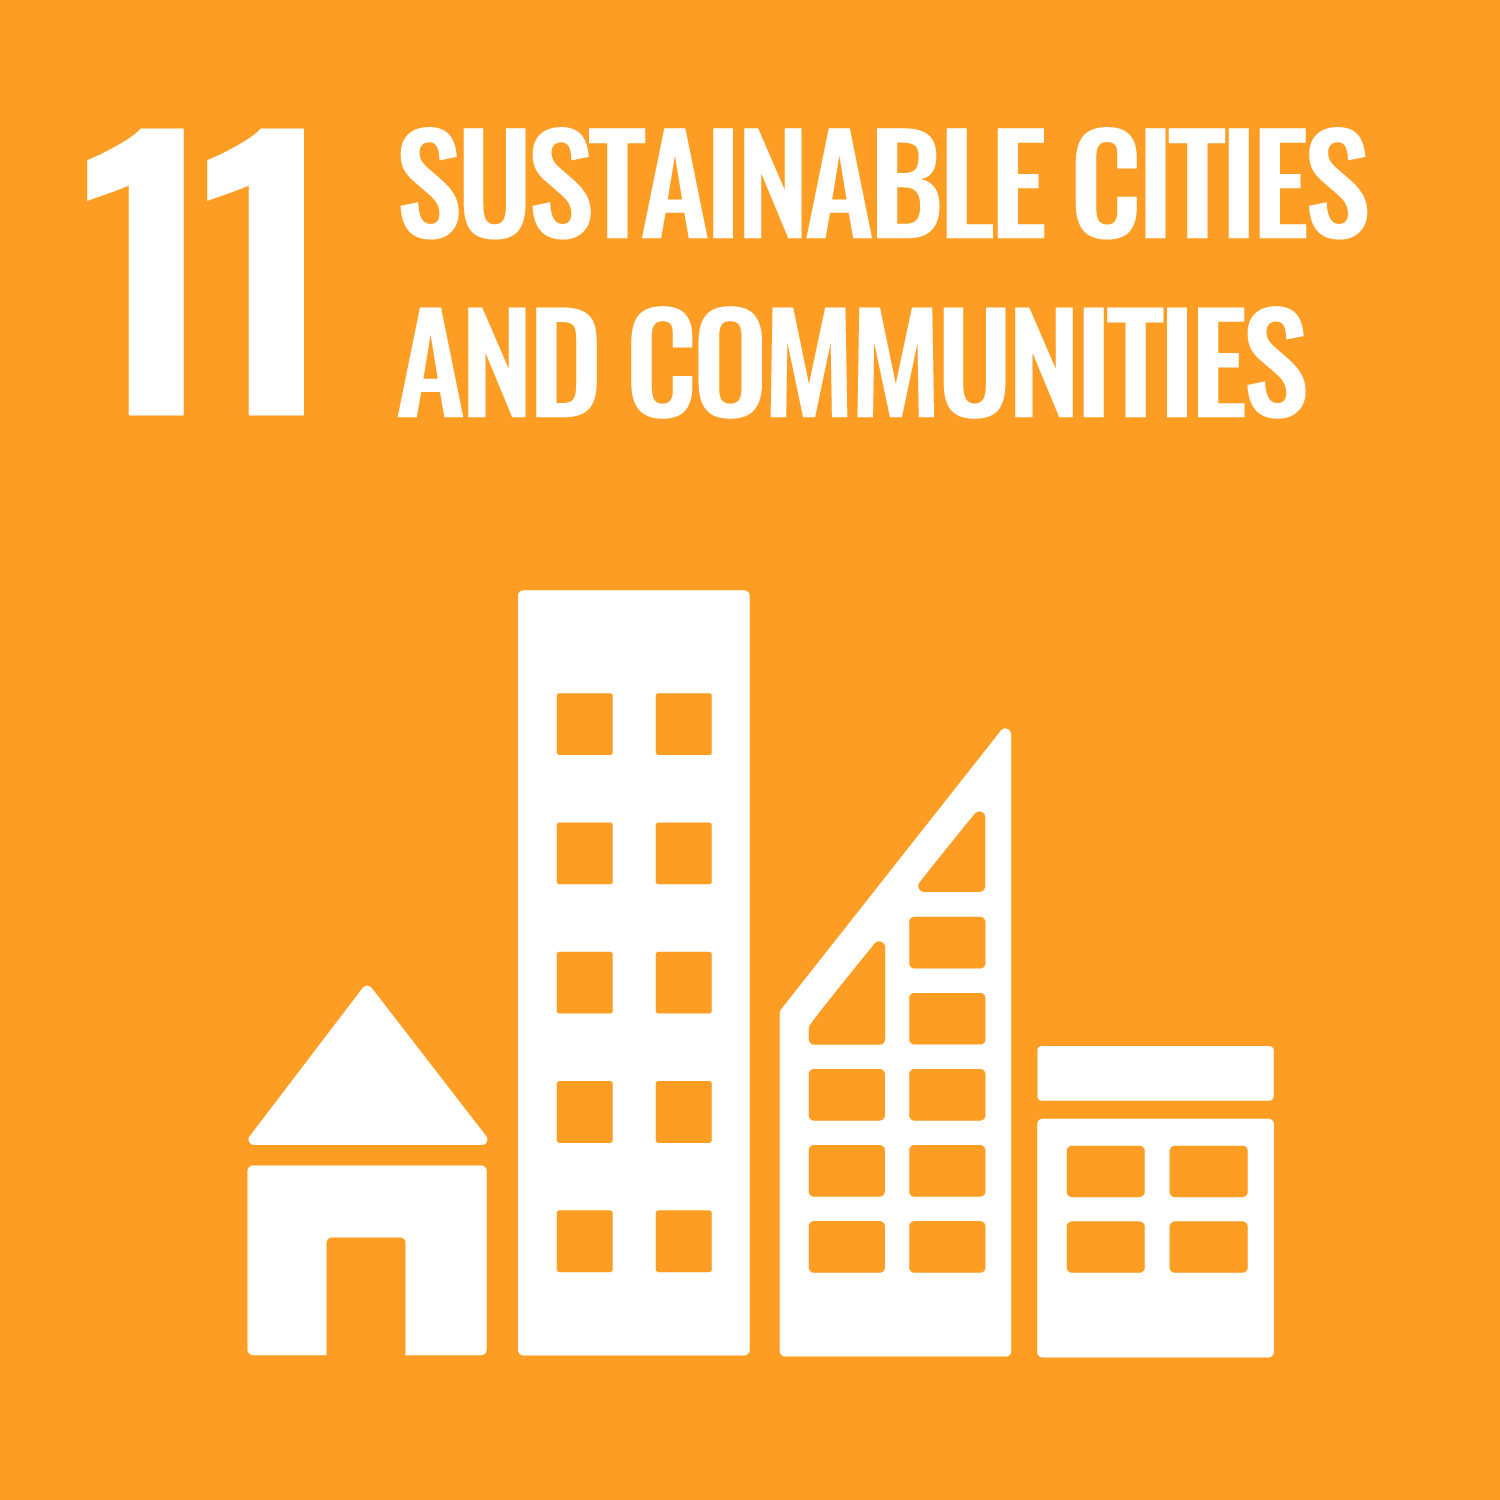 Goal 11: <span>Sustainable Cities and Communities</span>